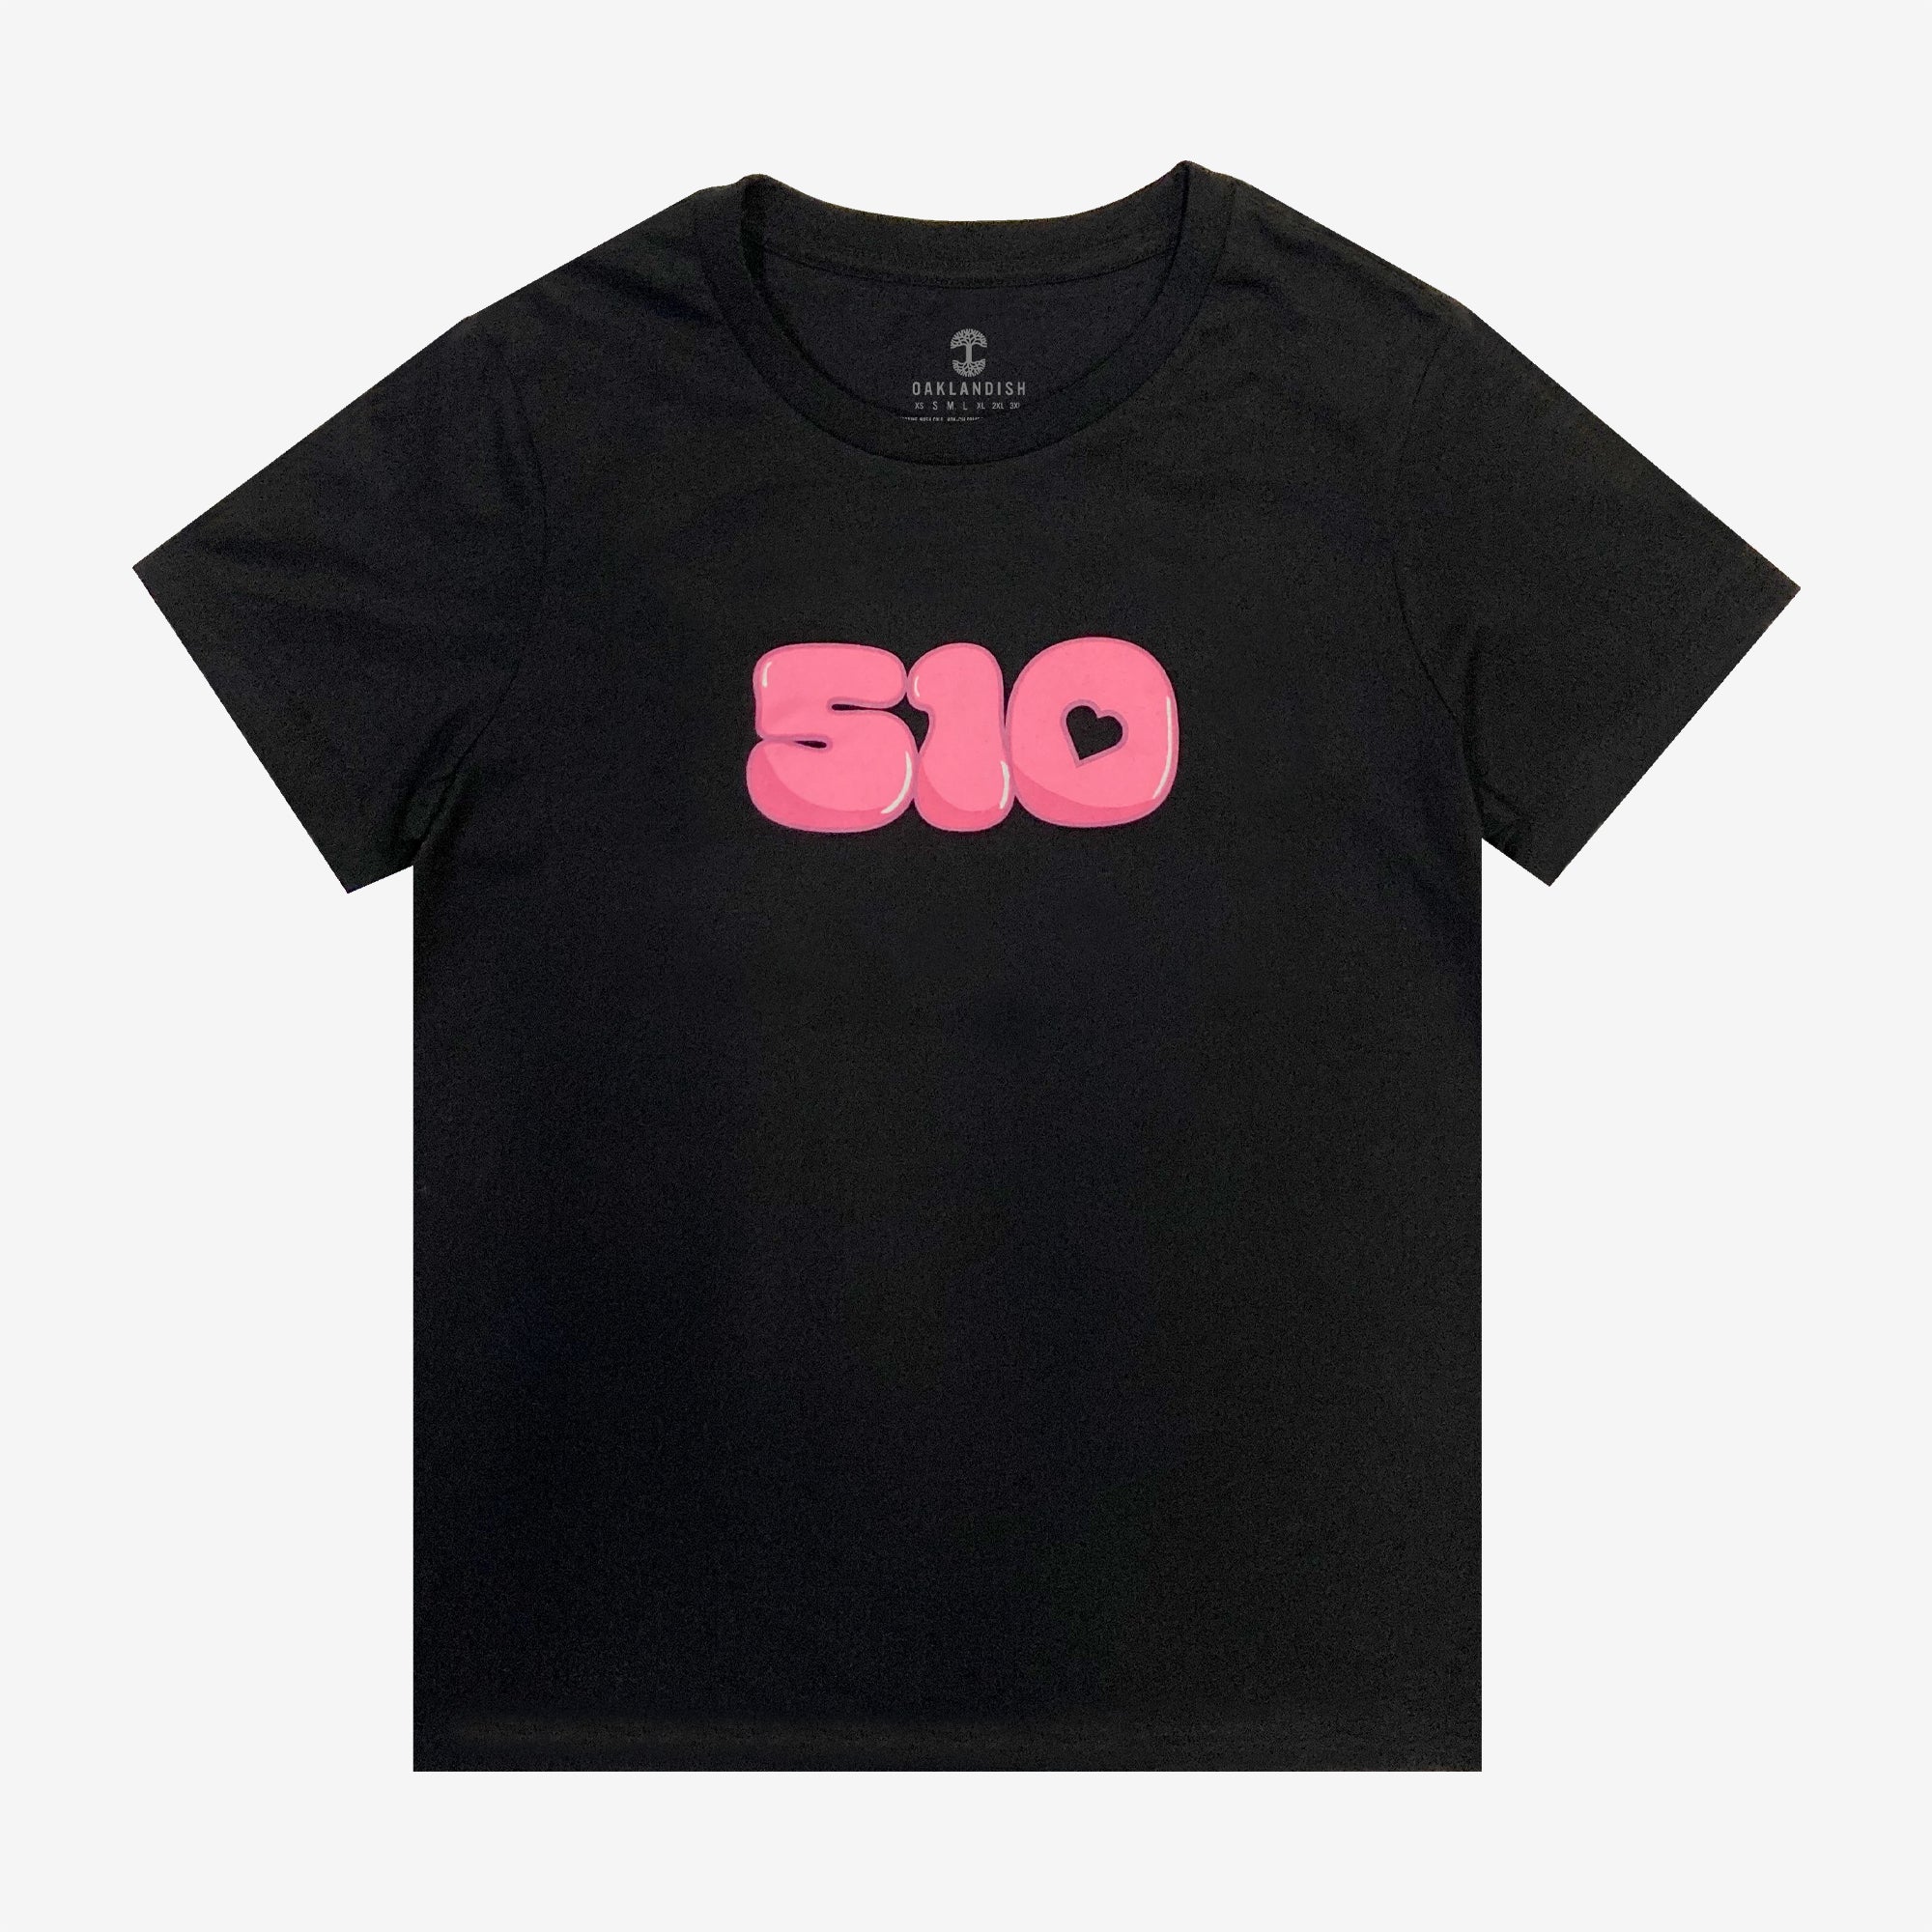 Women's black t-shirt with pink bubble numbers 510 graphic with the hole in the 0 shaped as a heart.